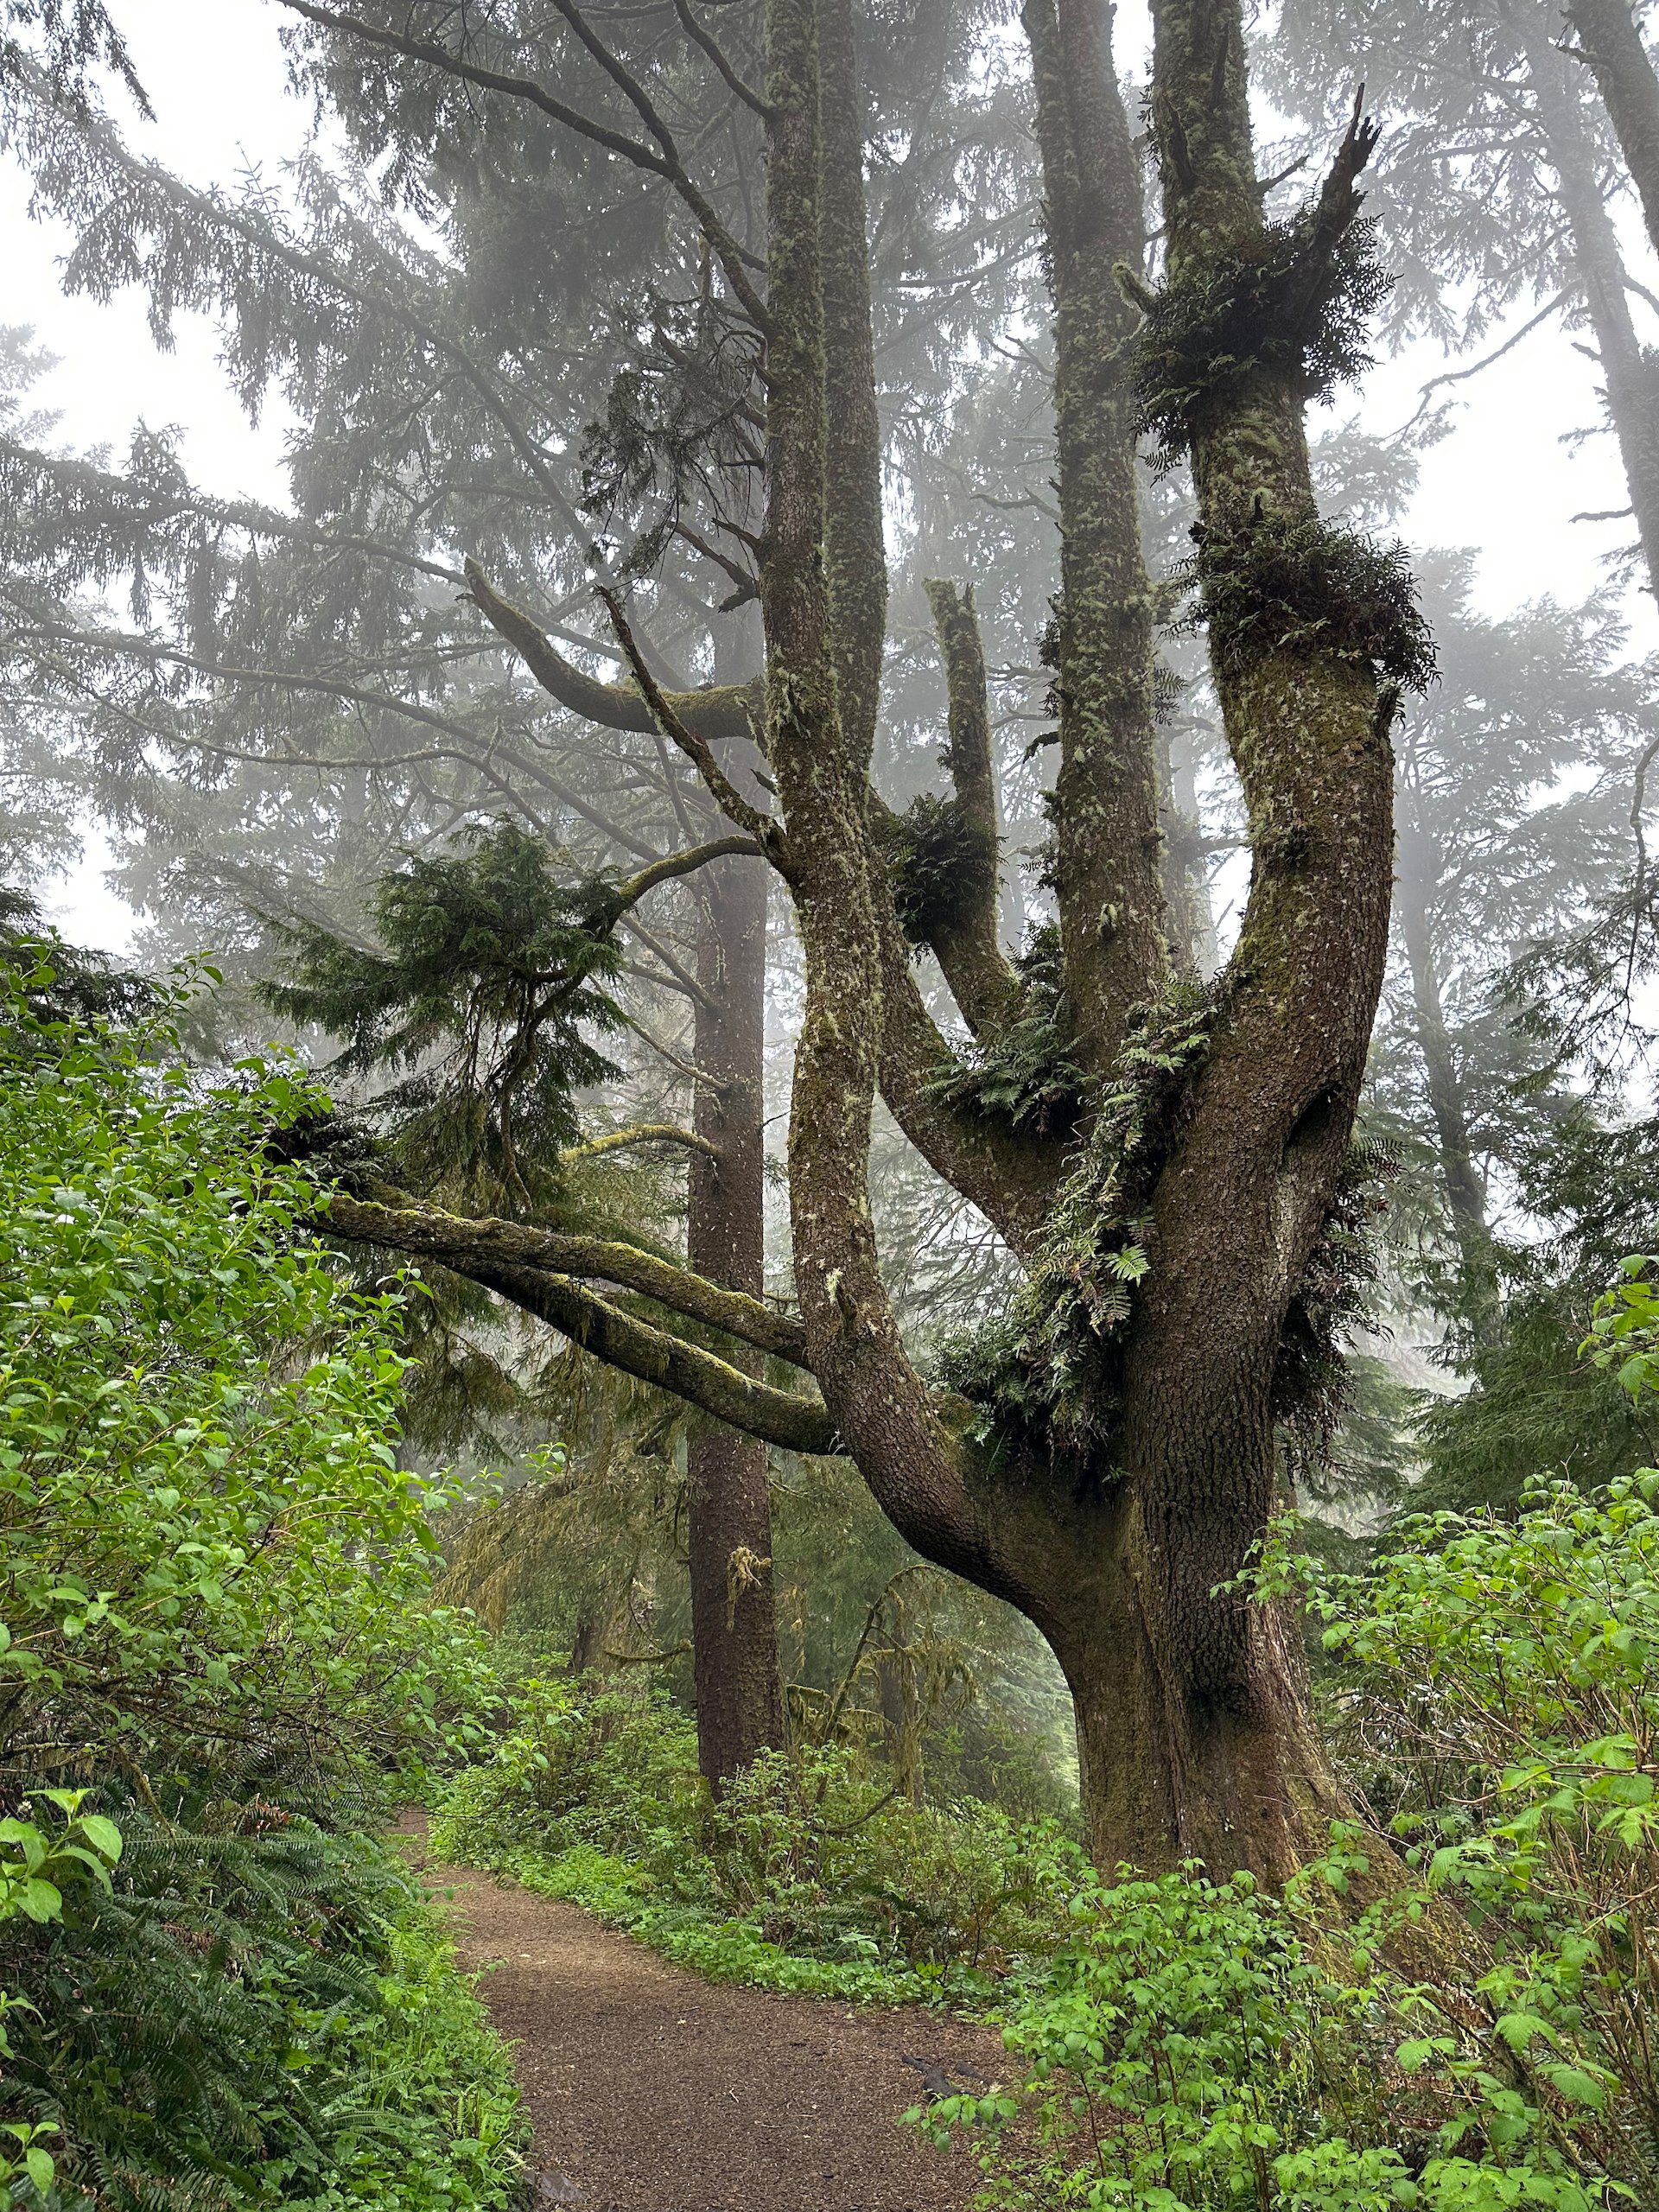  There are some large trees in the park.  